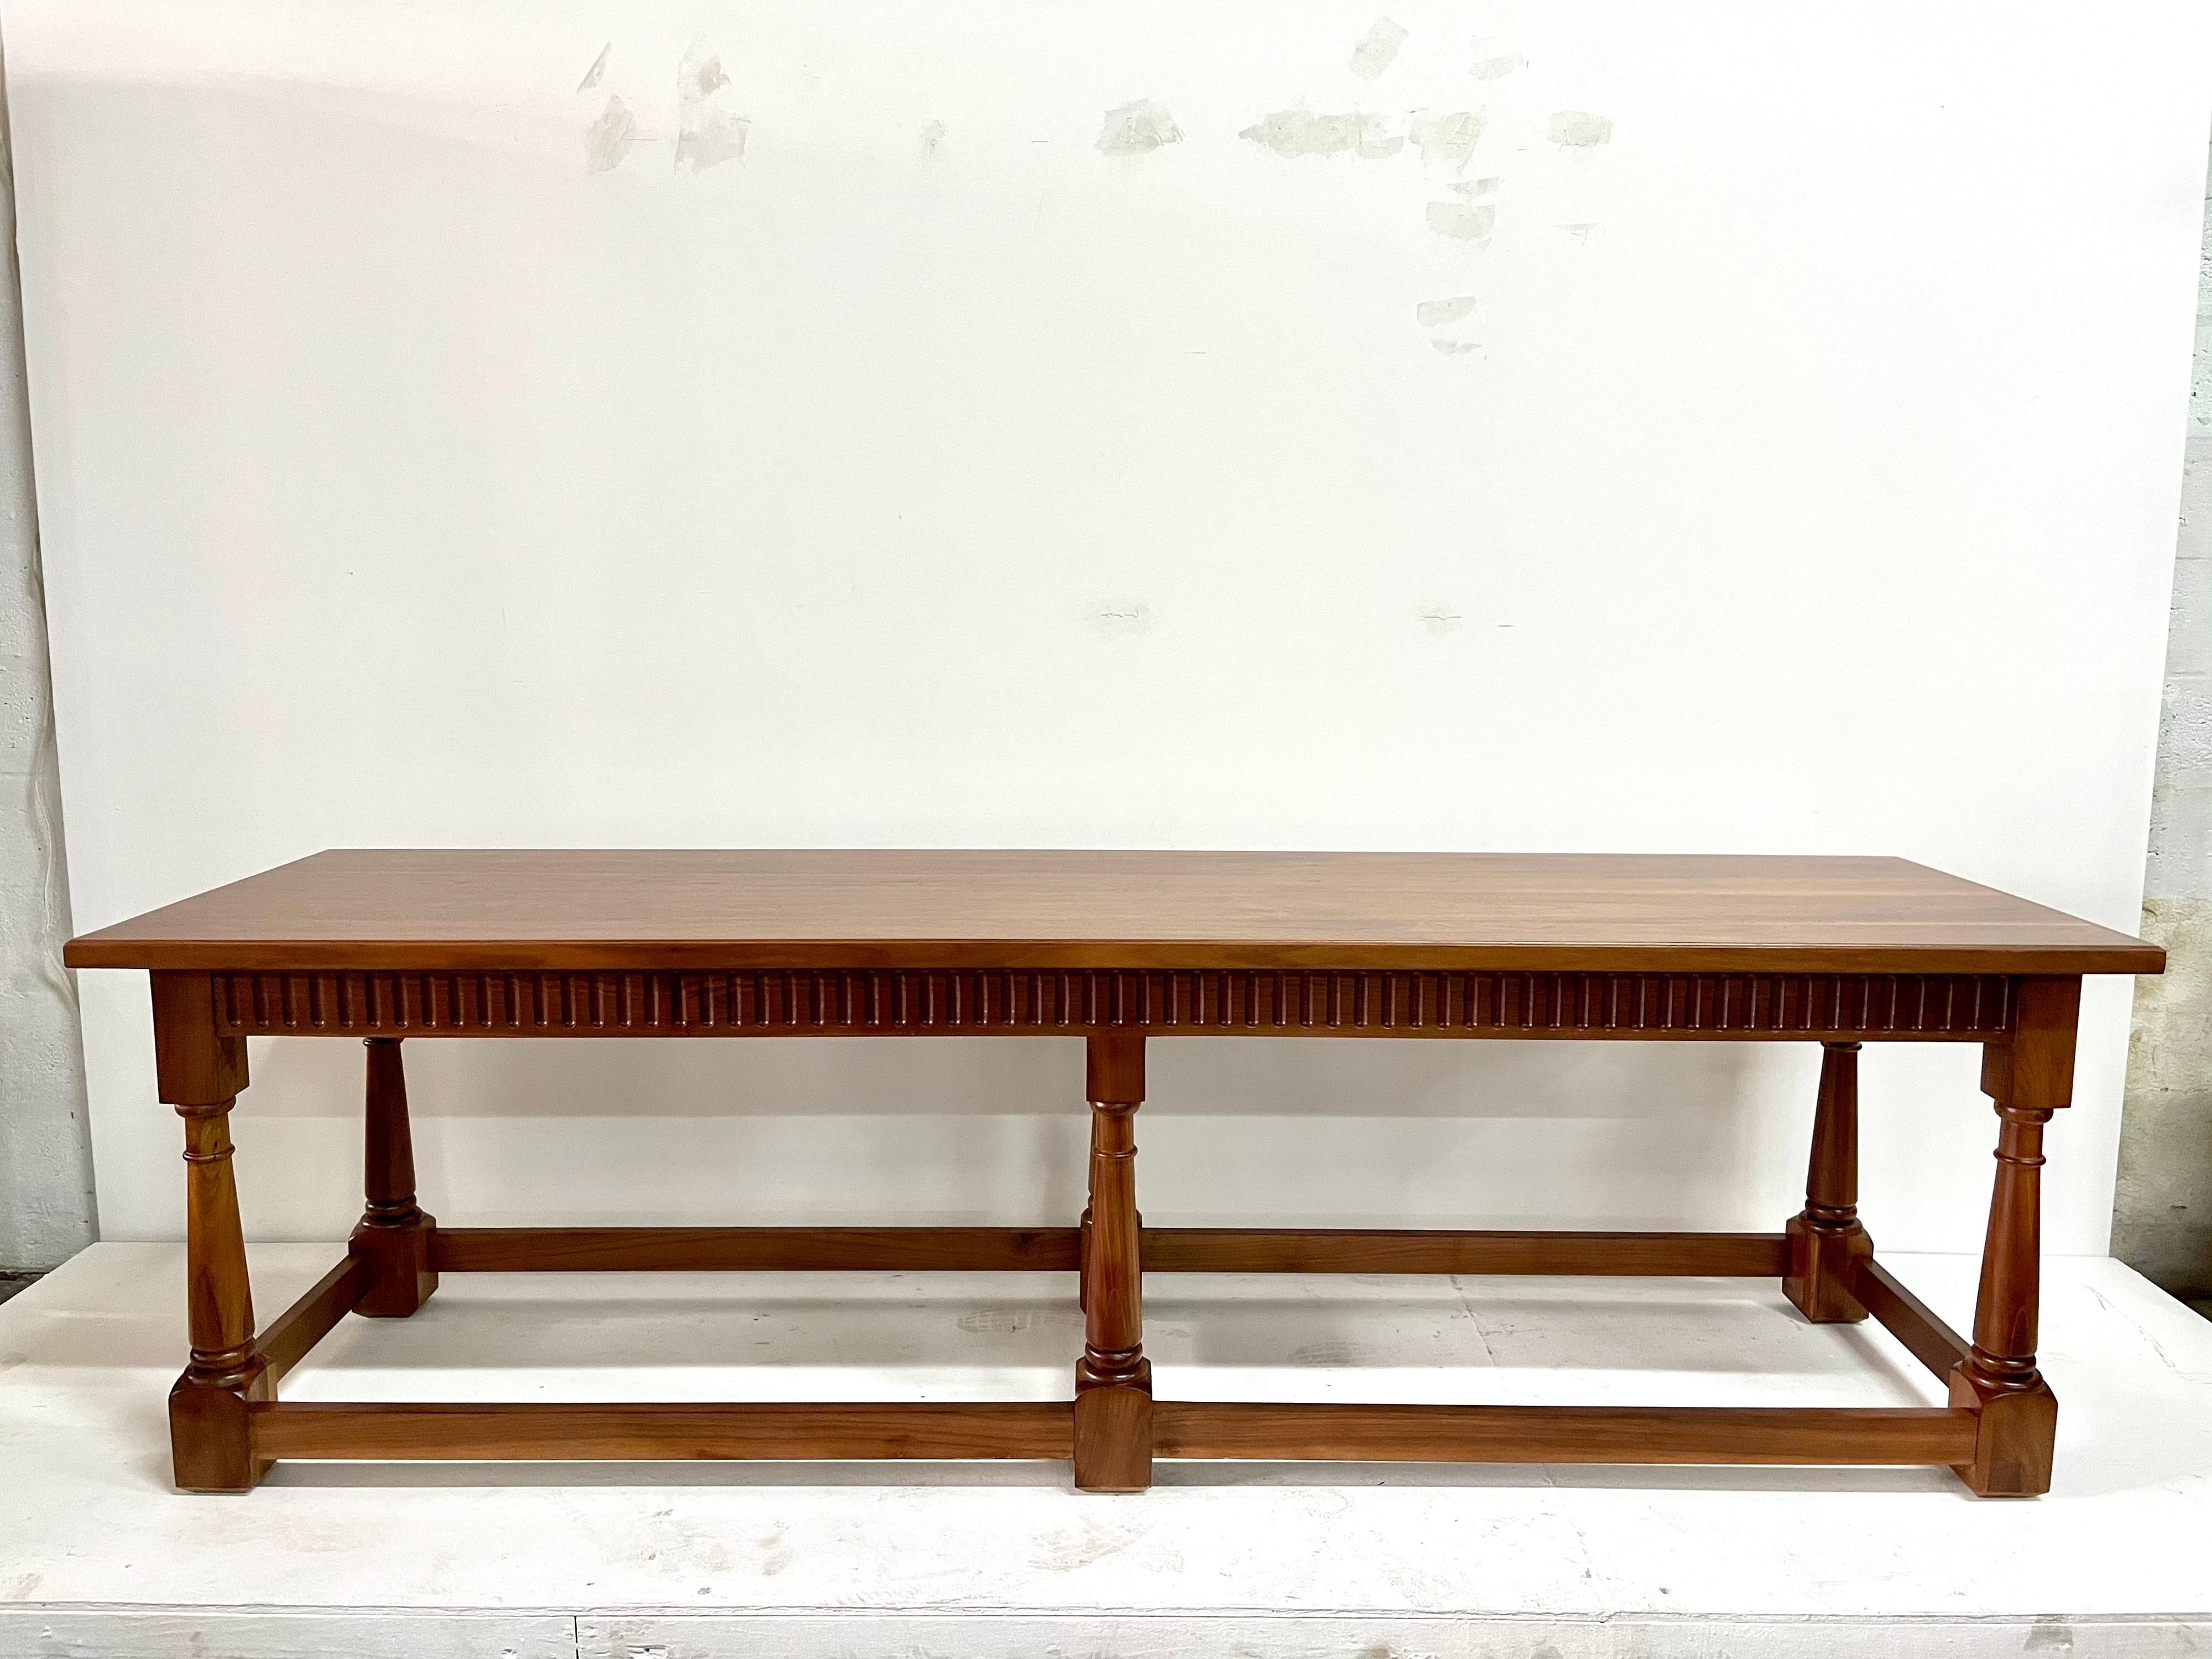 This truly important long table with carved wood stretchers and ribbed trim throughout. In really clean condition and ready to use.

Measures: 102 wide, 28 depth, 30 tall.